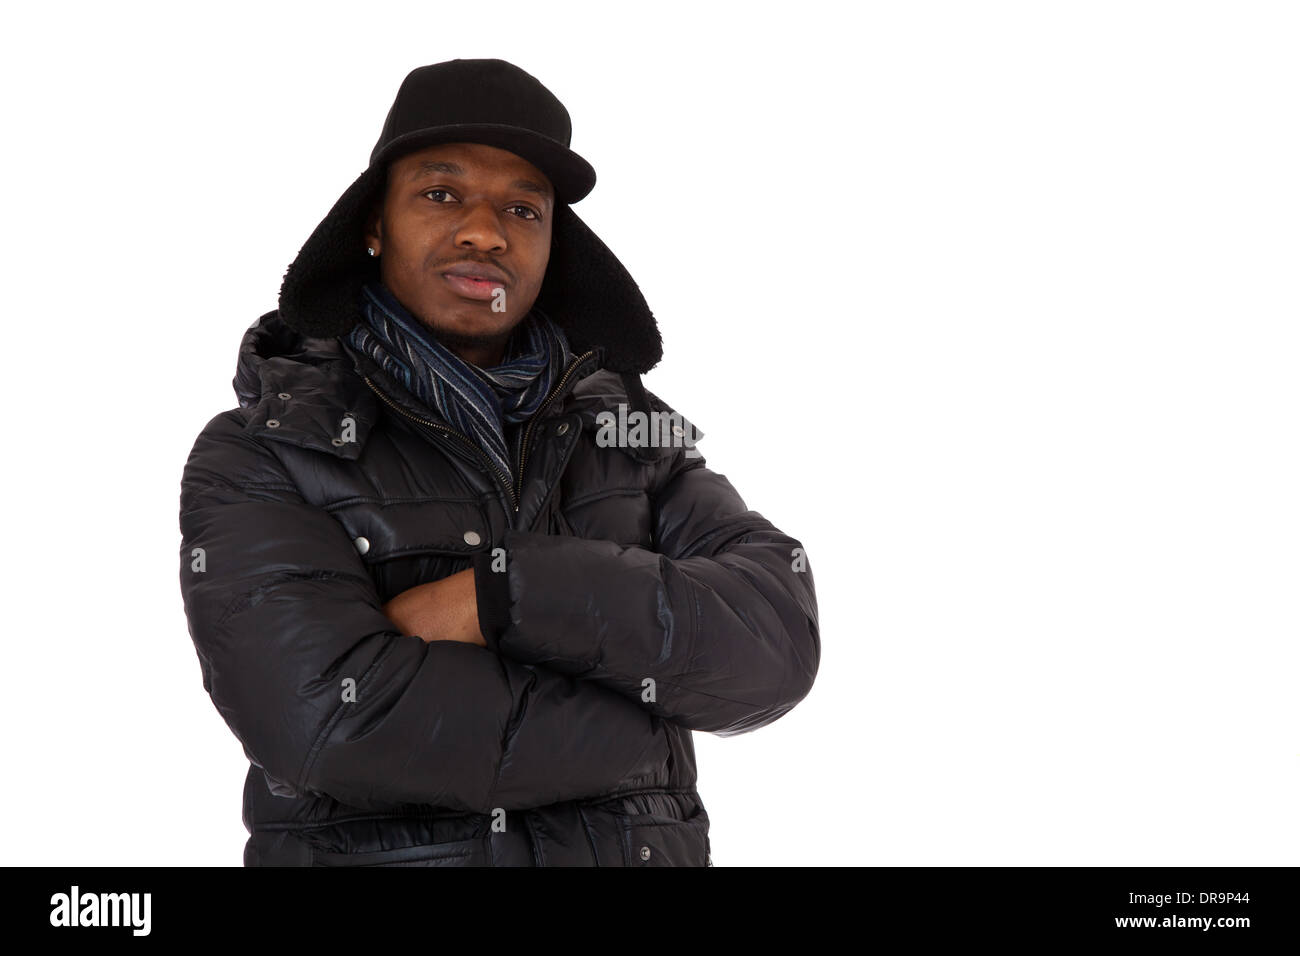 Black guy in winter clothes. All on white background Stock Photo